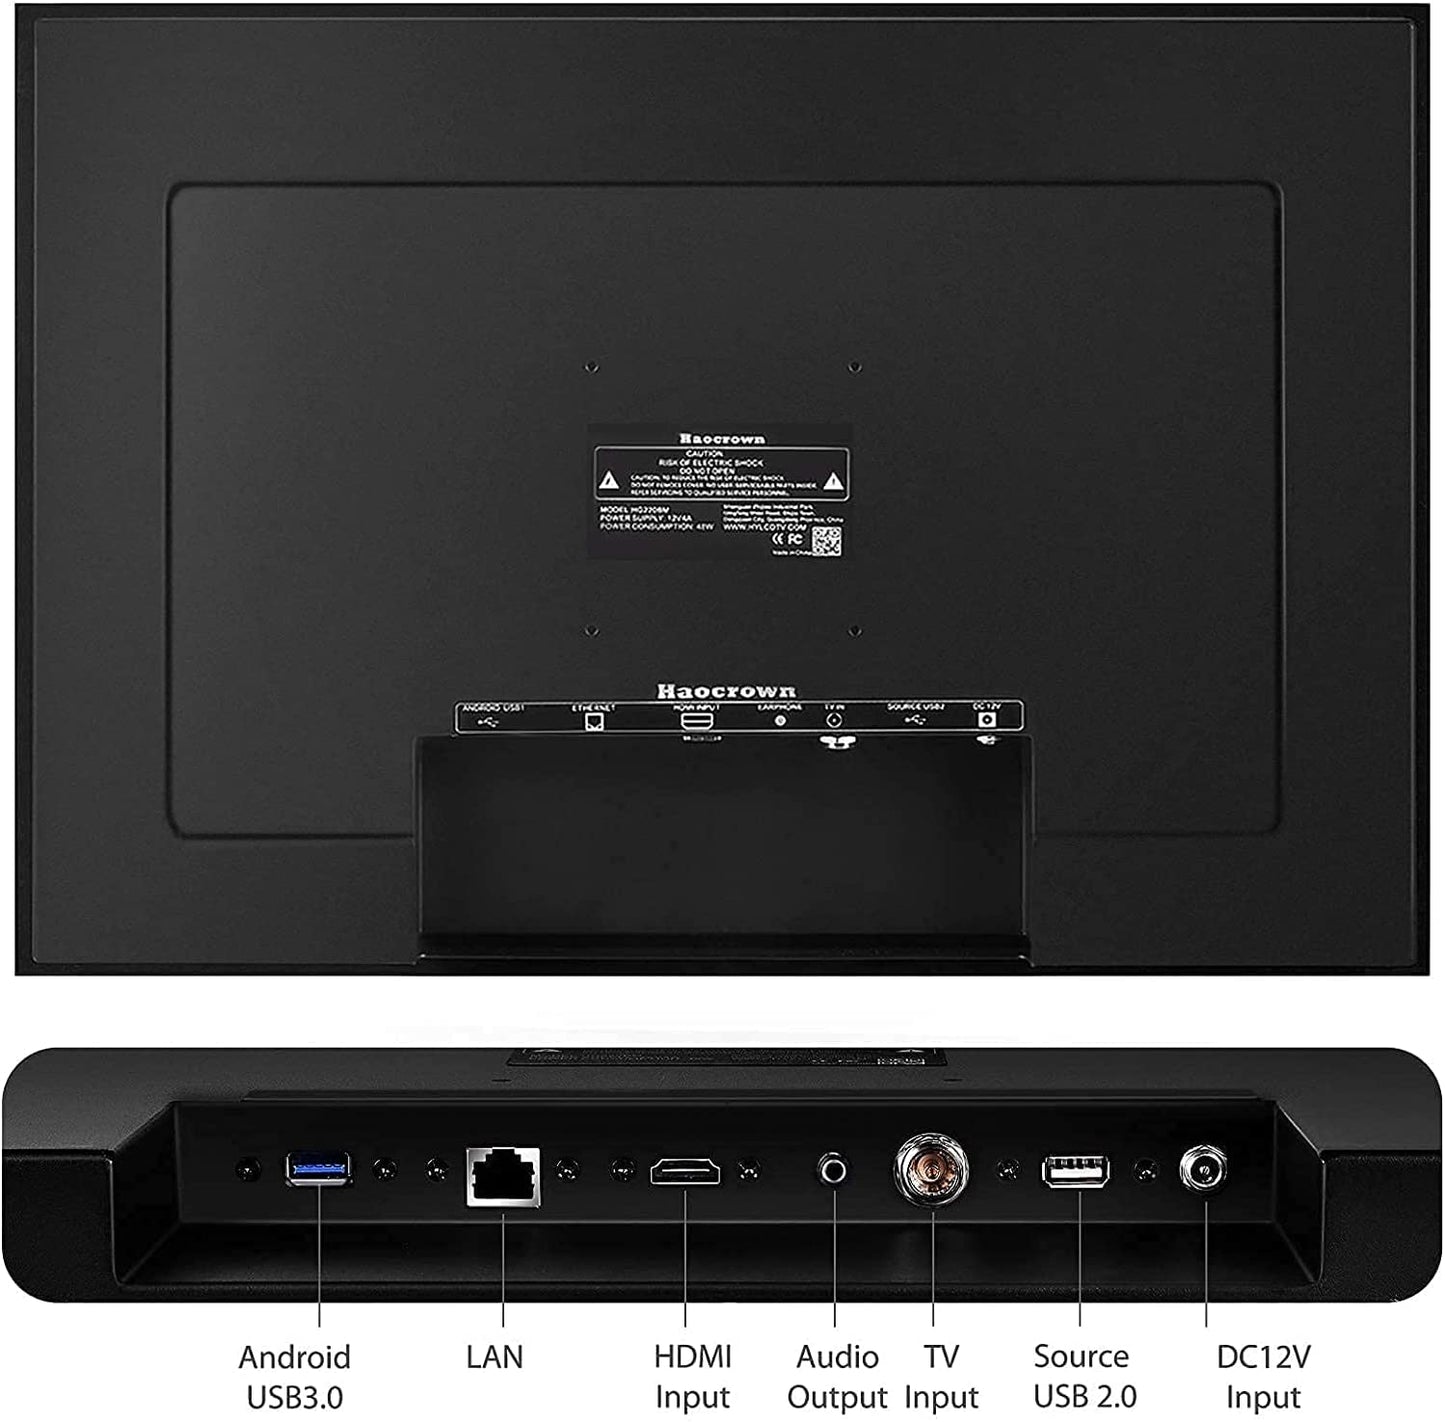 Bathroom Mirror 27-inch TV with Touchscreen IP66 Waterproof Smart Android 11.0 Television Full HD 1080P Built-in ATSC Tuner Wi-Fi Bluetooth (Touch Control, Mirrored Frame)(LEHG270BM-M)